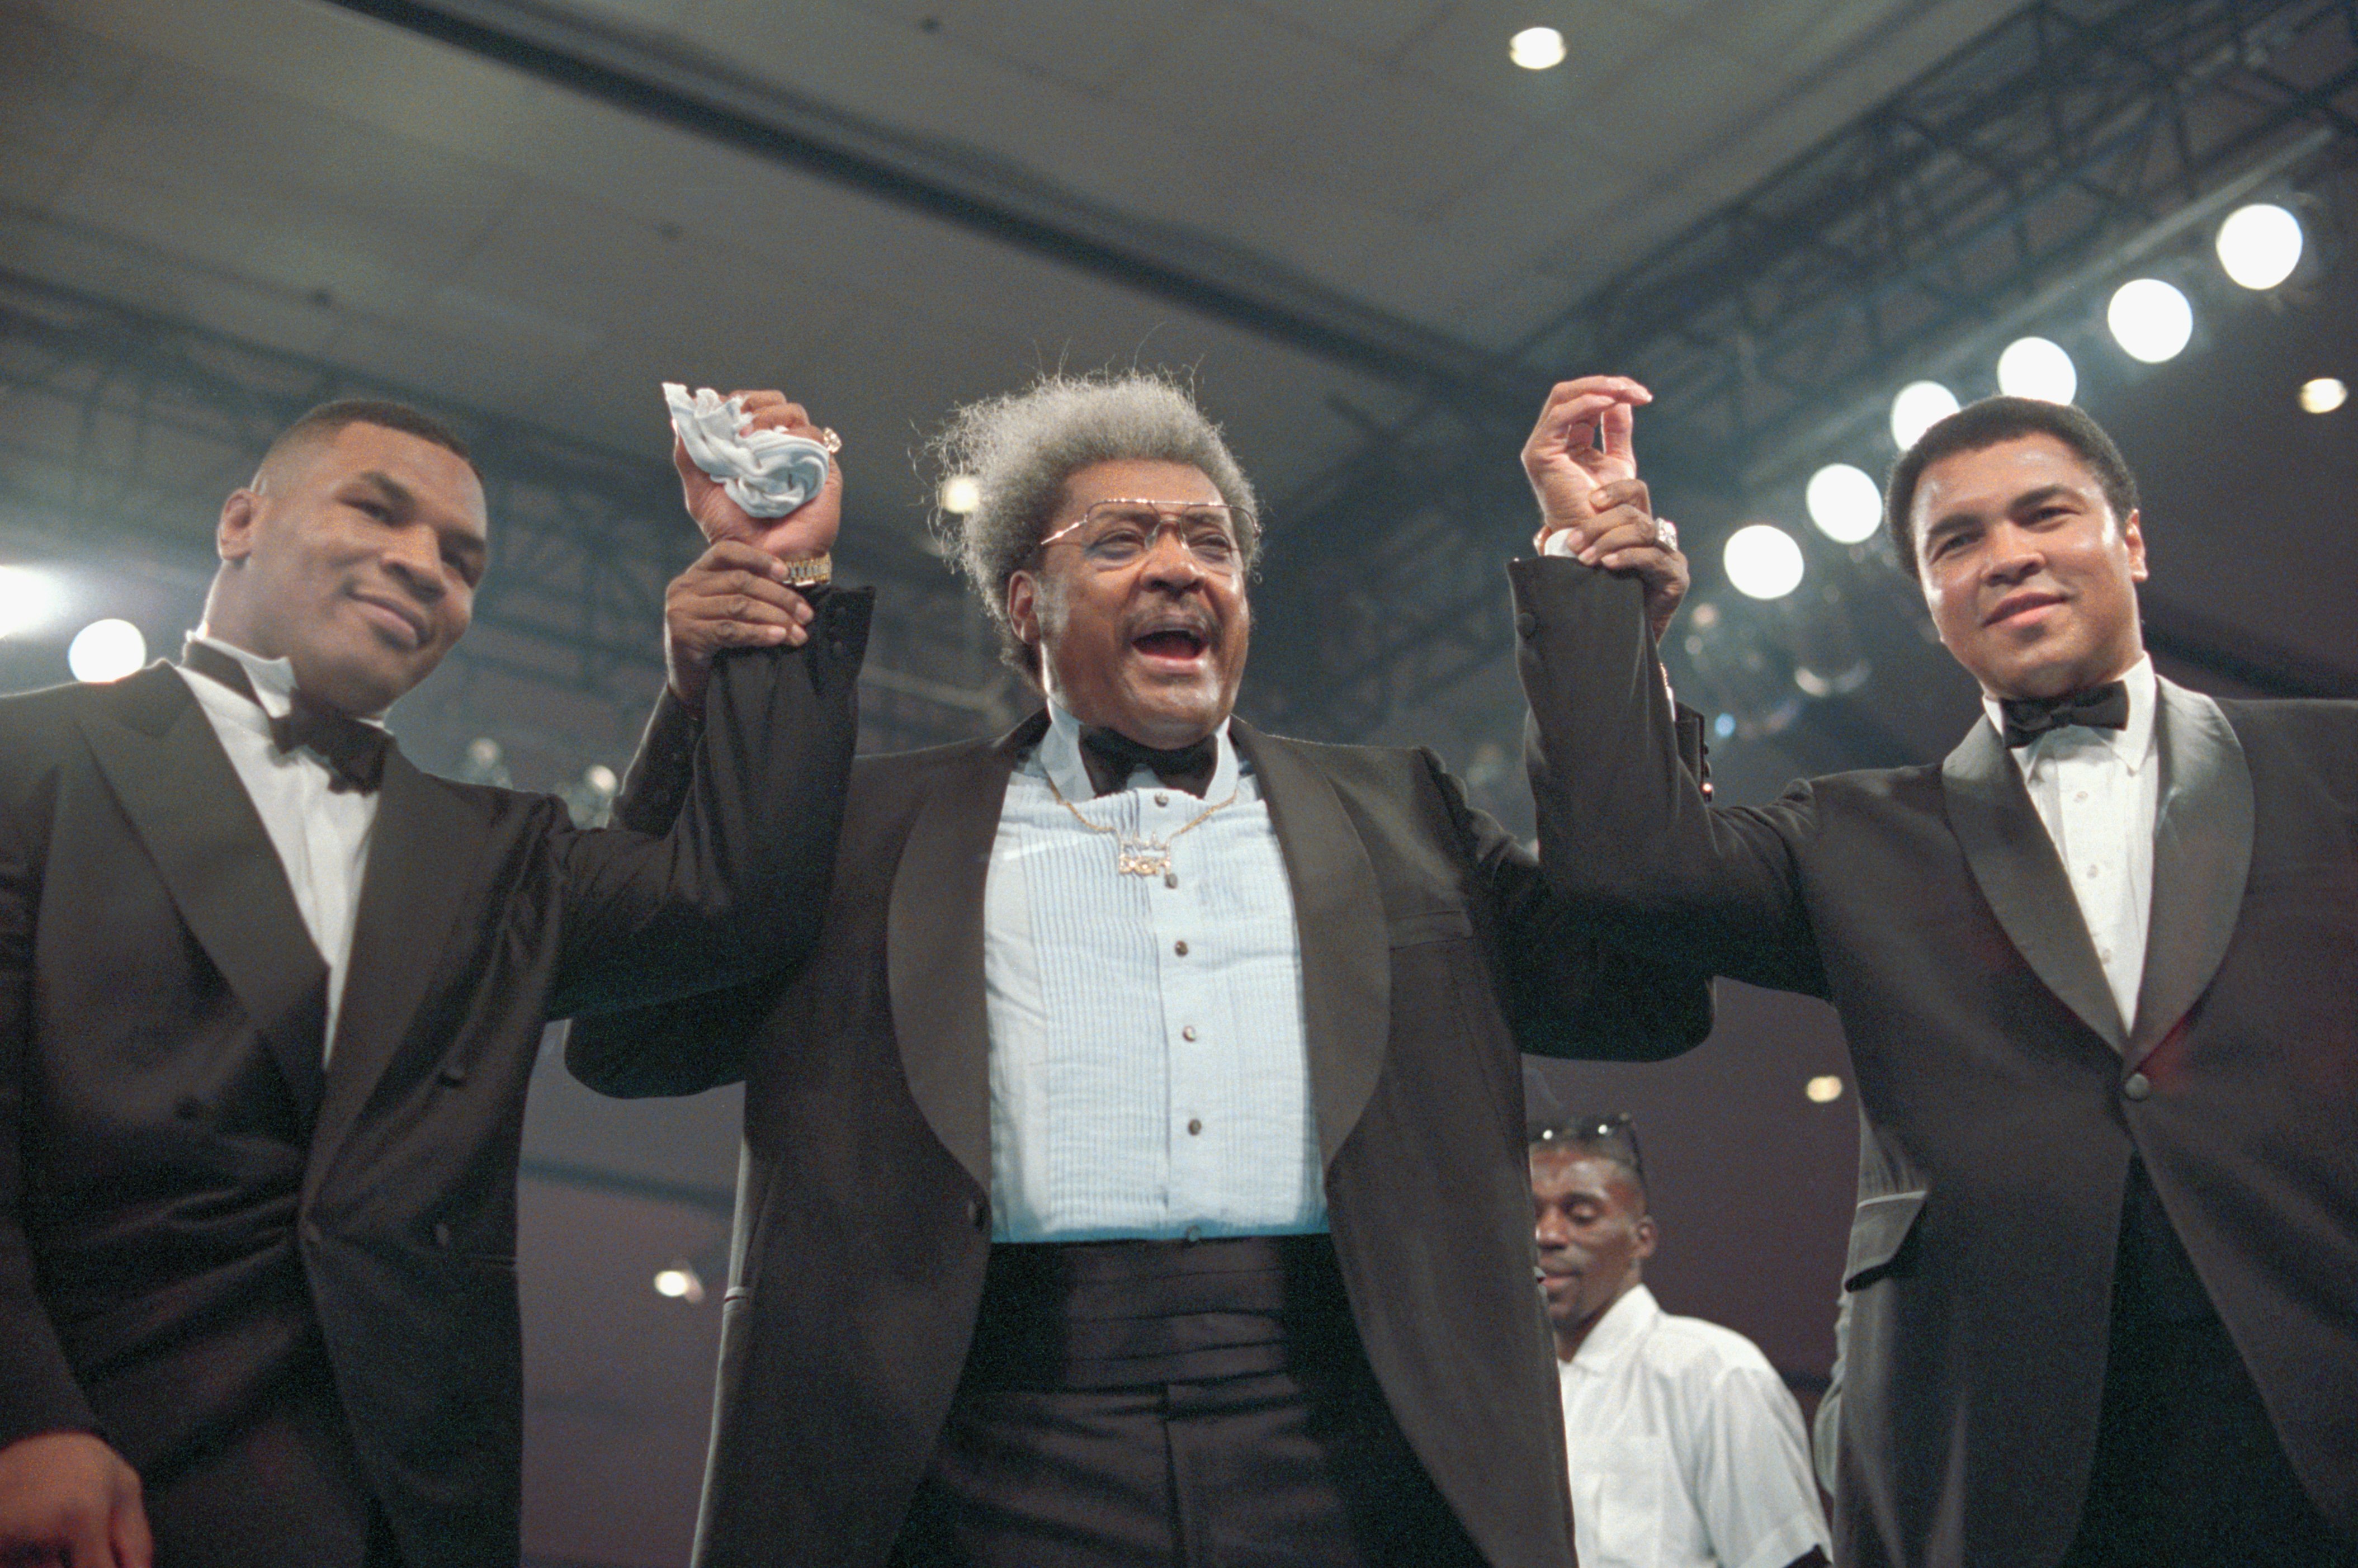 Mike Tyson, Don King, and Mohammed Ali, all clasping hands wearing tuxedos in the boxing ring at the Las Vegas Hilton | Source: Getty Images